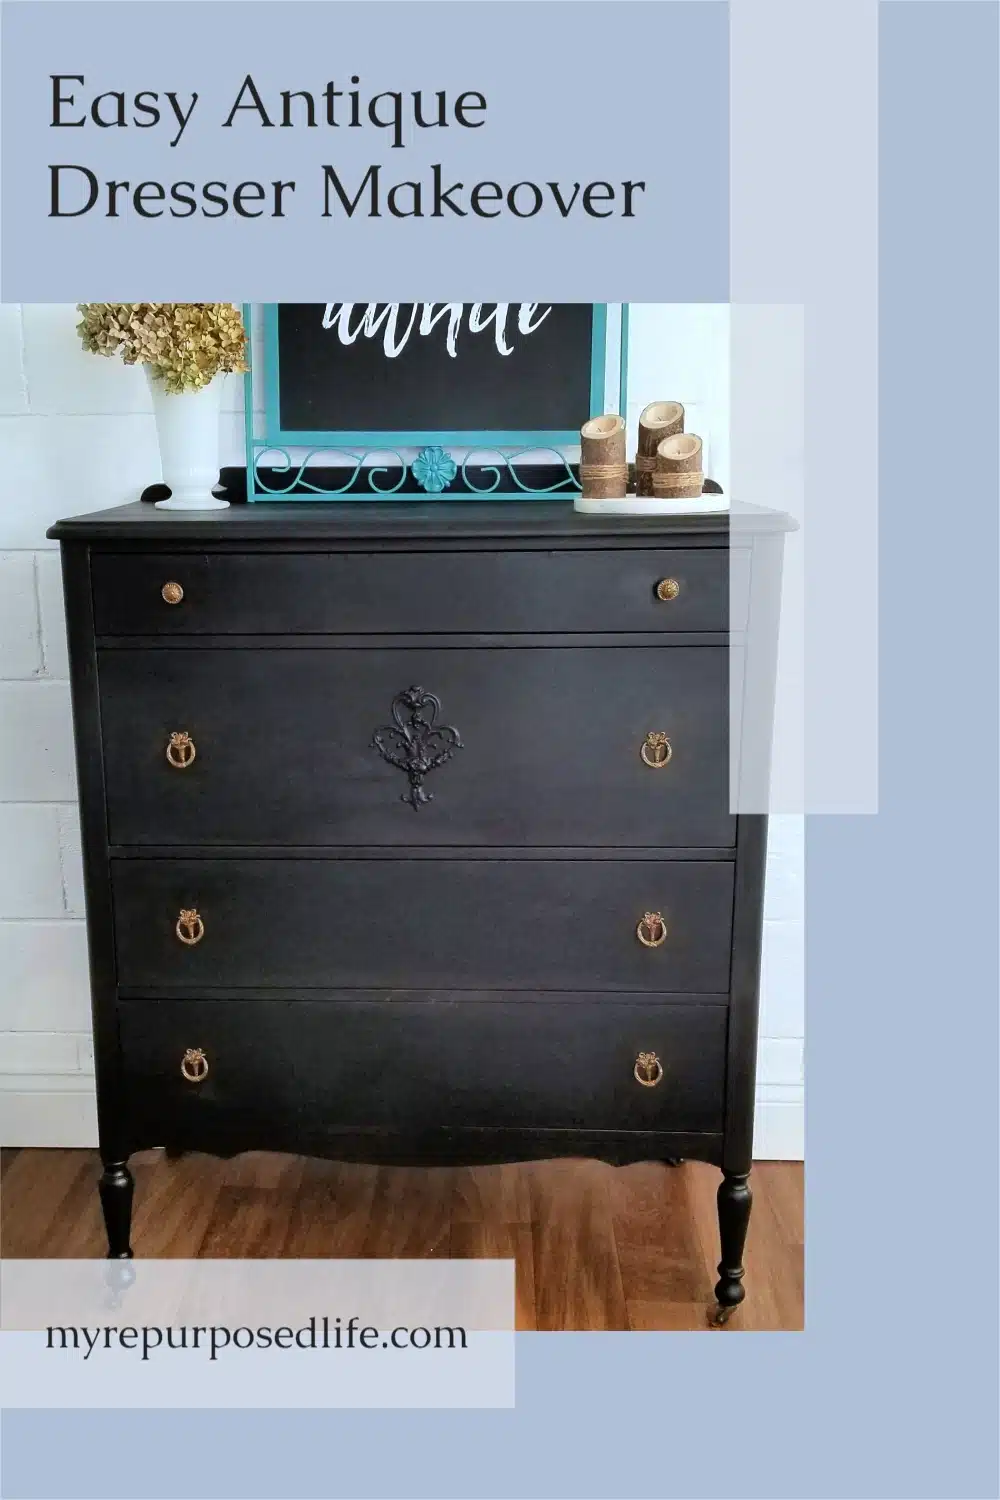 Yes, I painted it. Free furniture is anything goes around here. Only family heirlooms get restored. Tips on painting old furniture by hand and spray painting hardware. Casters? Yep, how to clean them too. Don't you agree the old gal looks great all dressed in black? #MyRepurposedLife #furniture #makeover via @repurposedlife